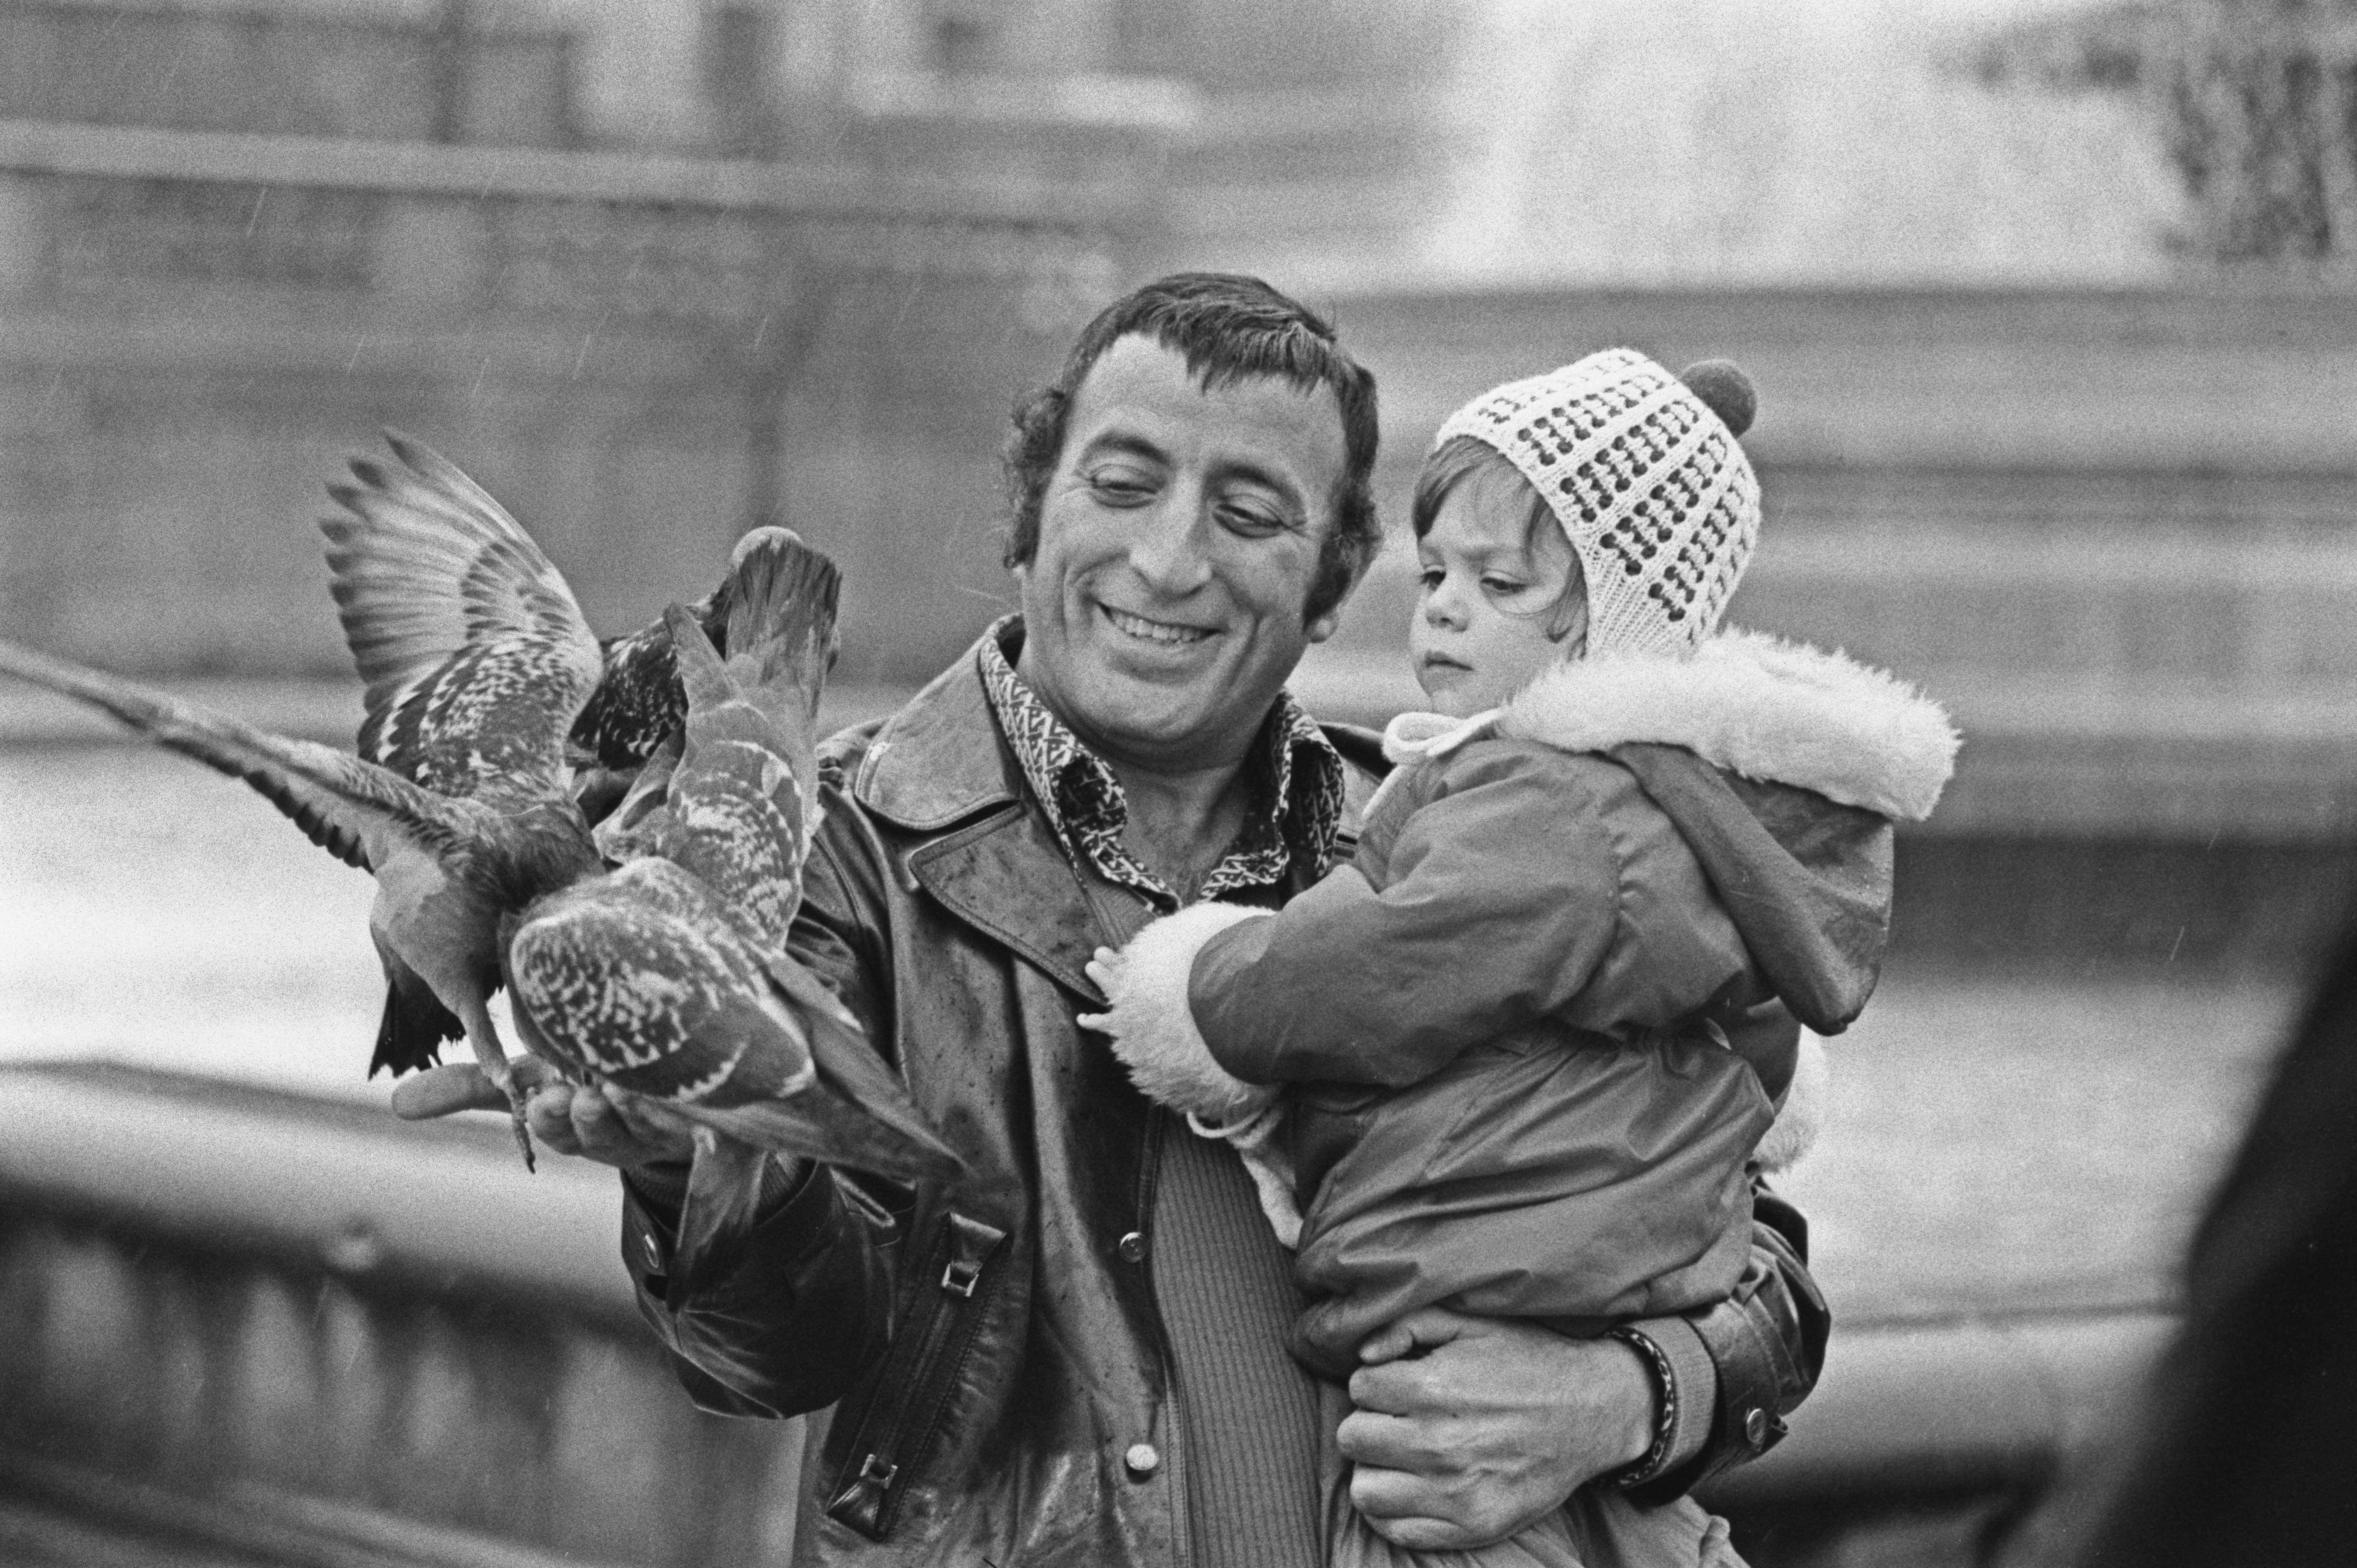 Tony Bennett feeding the pigeons with his daughter Joanna on January 14, 1972, in the UK | Source: Getty Images